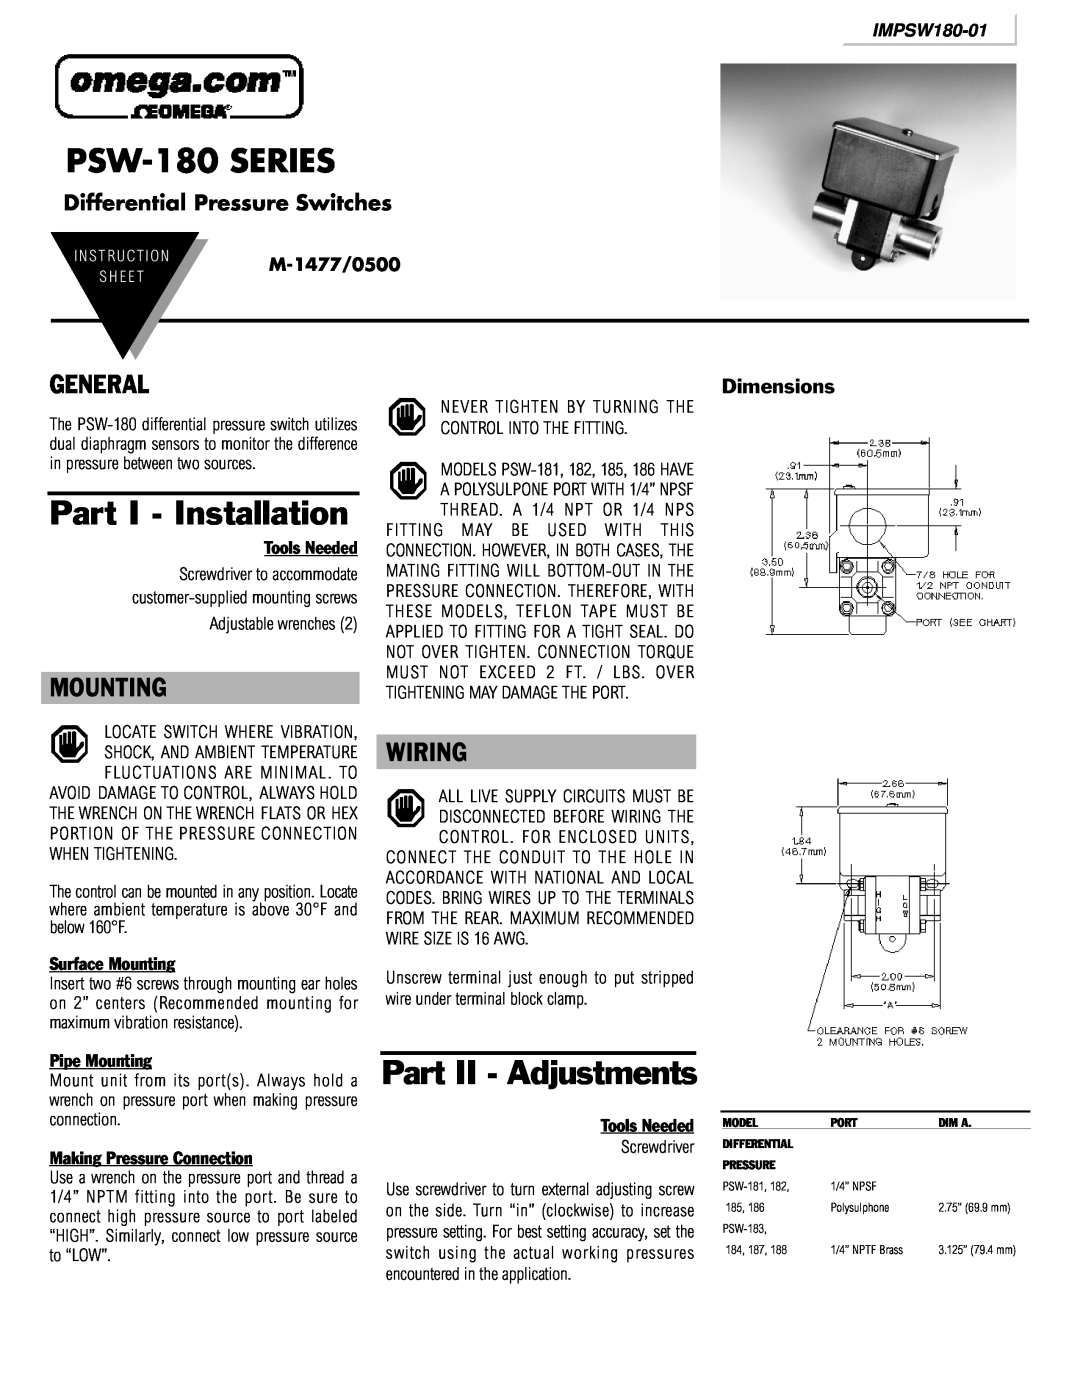 Omega Engineering dimensions PSW-180 SERIES, Part I - Installation, Part II - Adjustments, General, Mounting, Wiring 